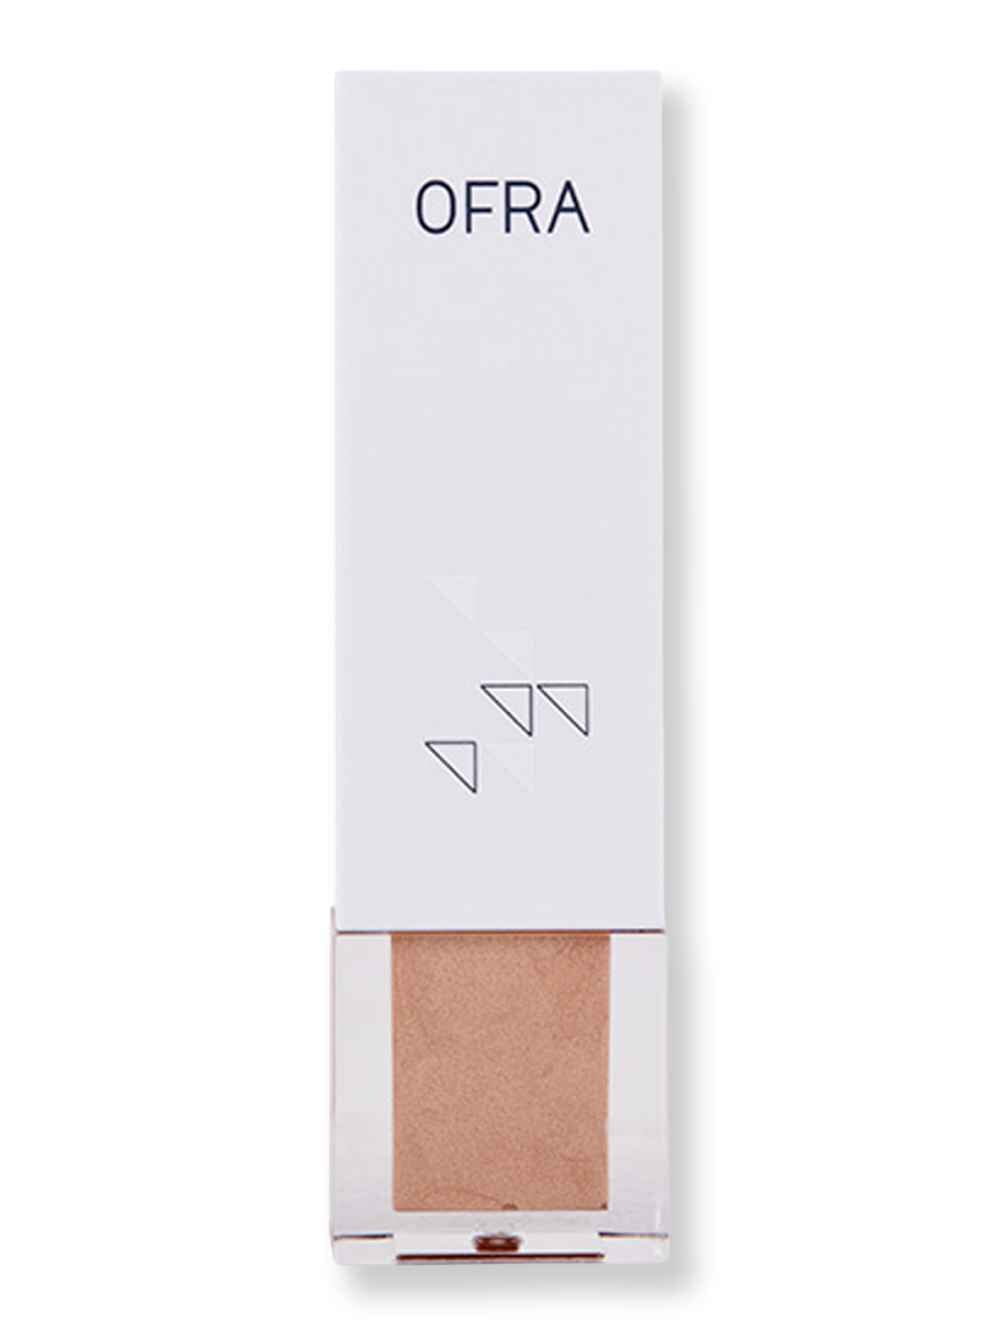 OFRA Cosmetics OFRA Cosmetics Rodeo Drive Primer 1 oz Face Primers 